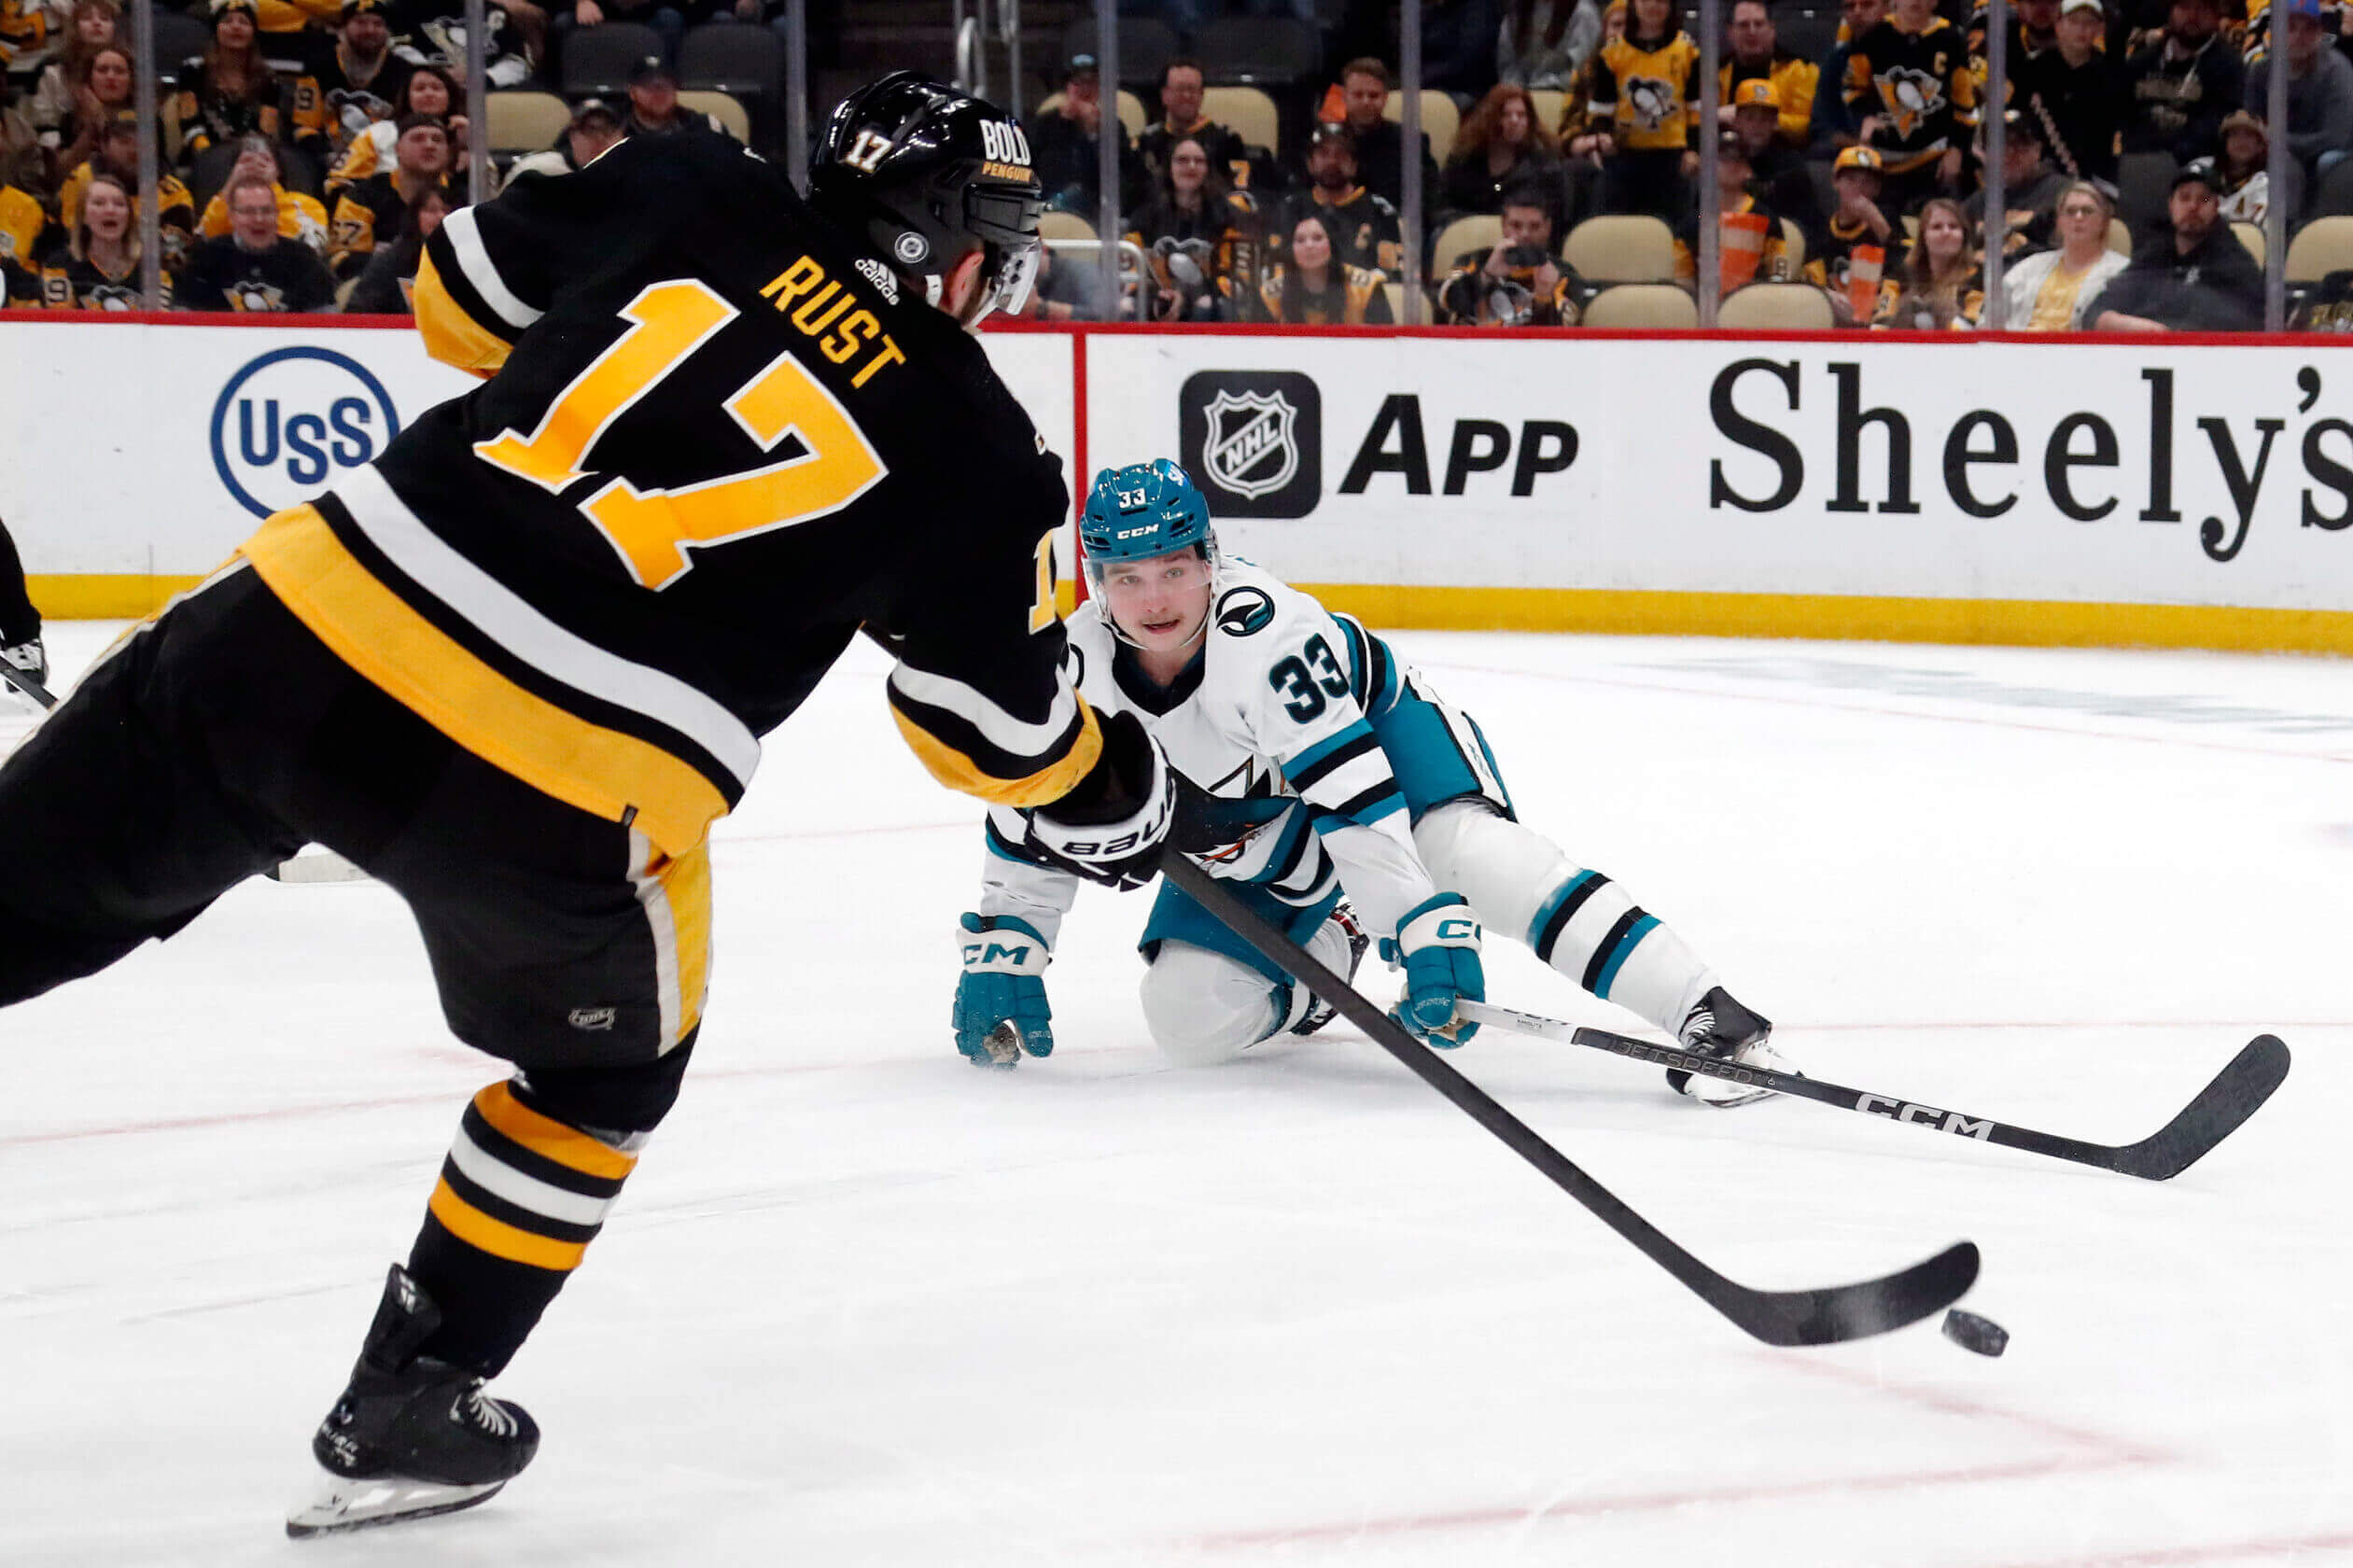 Yohe’s 10 observations: Remarkably, the Penguins pull within 5 points of a playoff spot